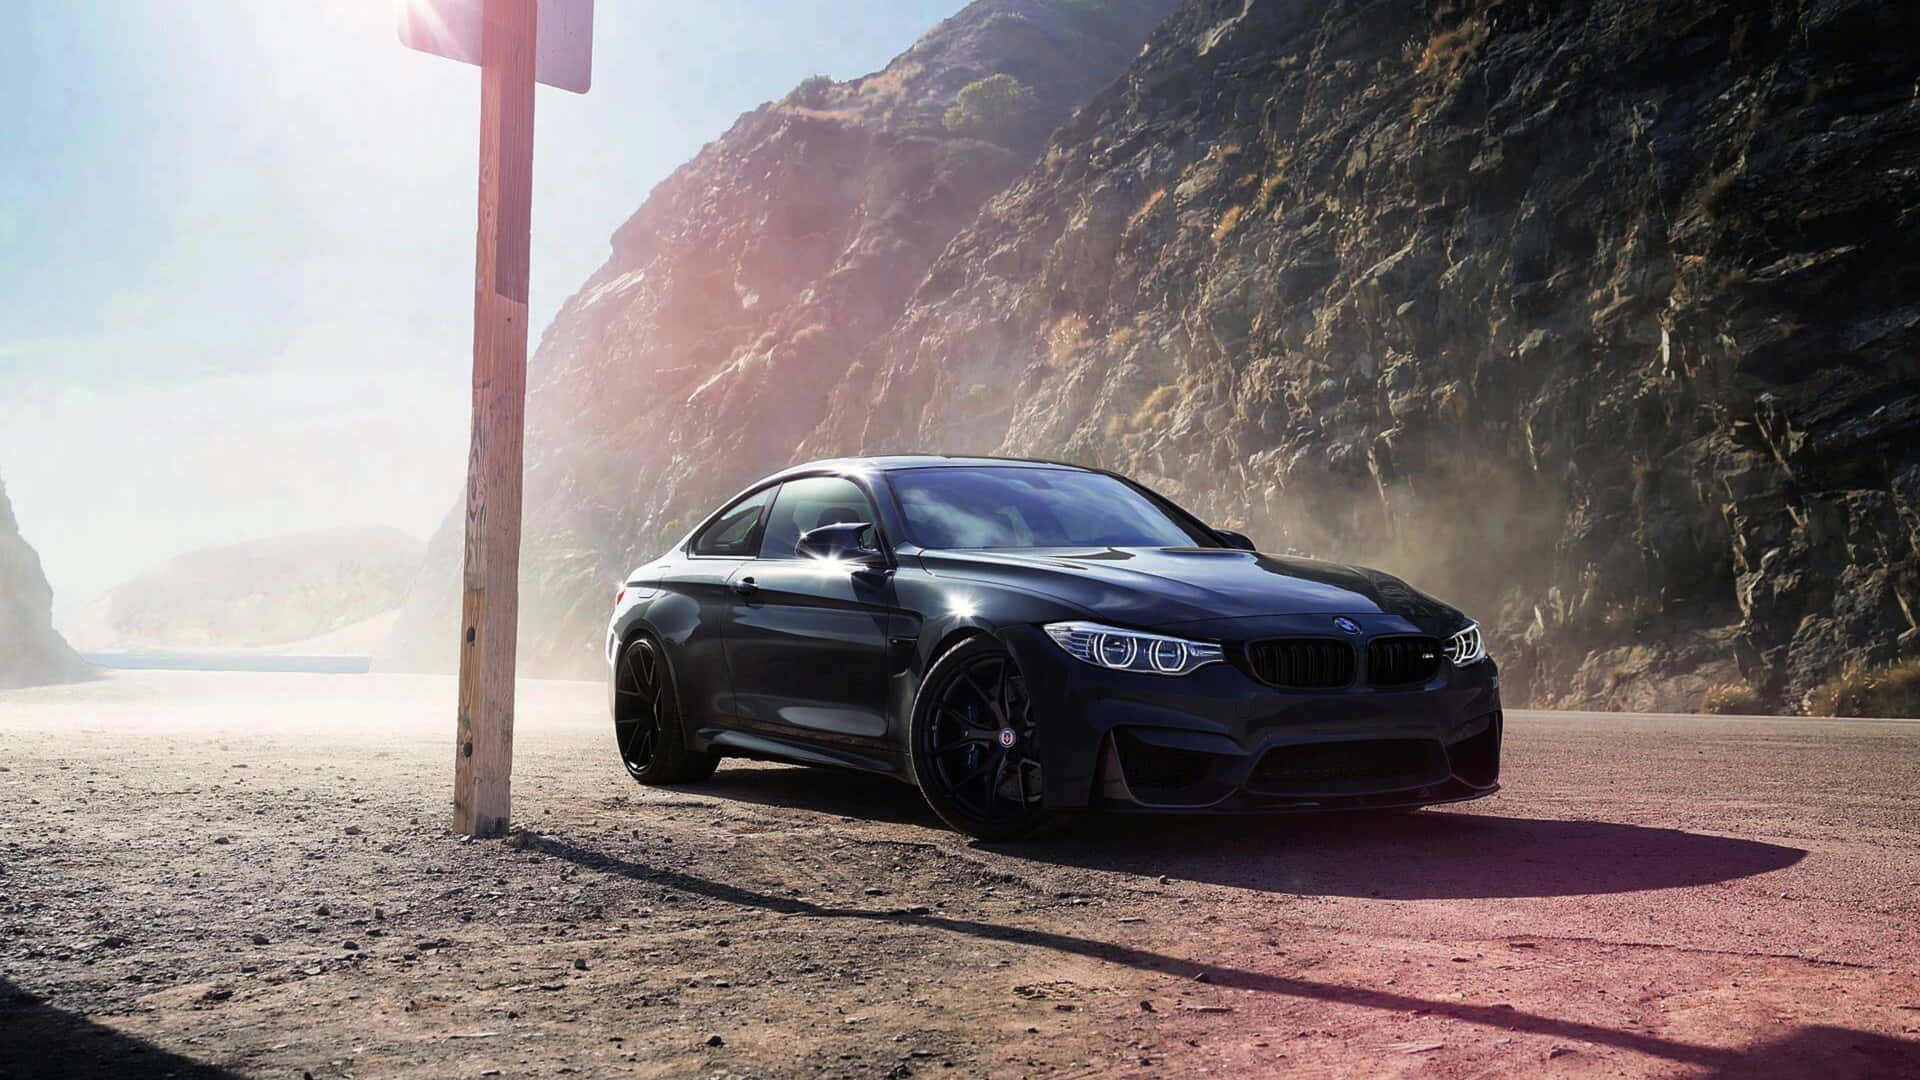 Jet Black BMW Beamer With a Luxurious Look